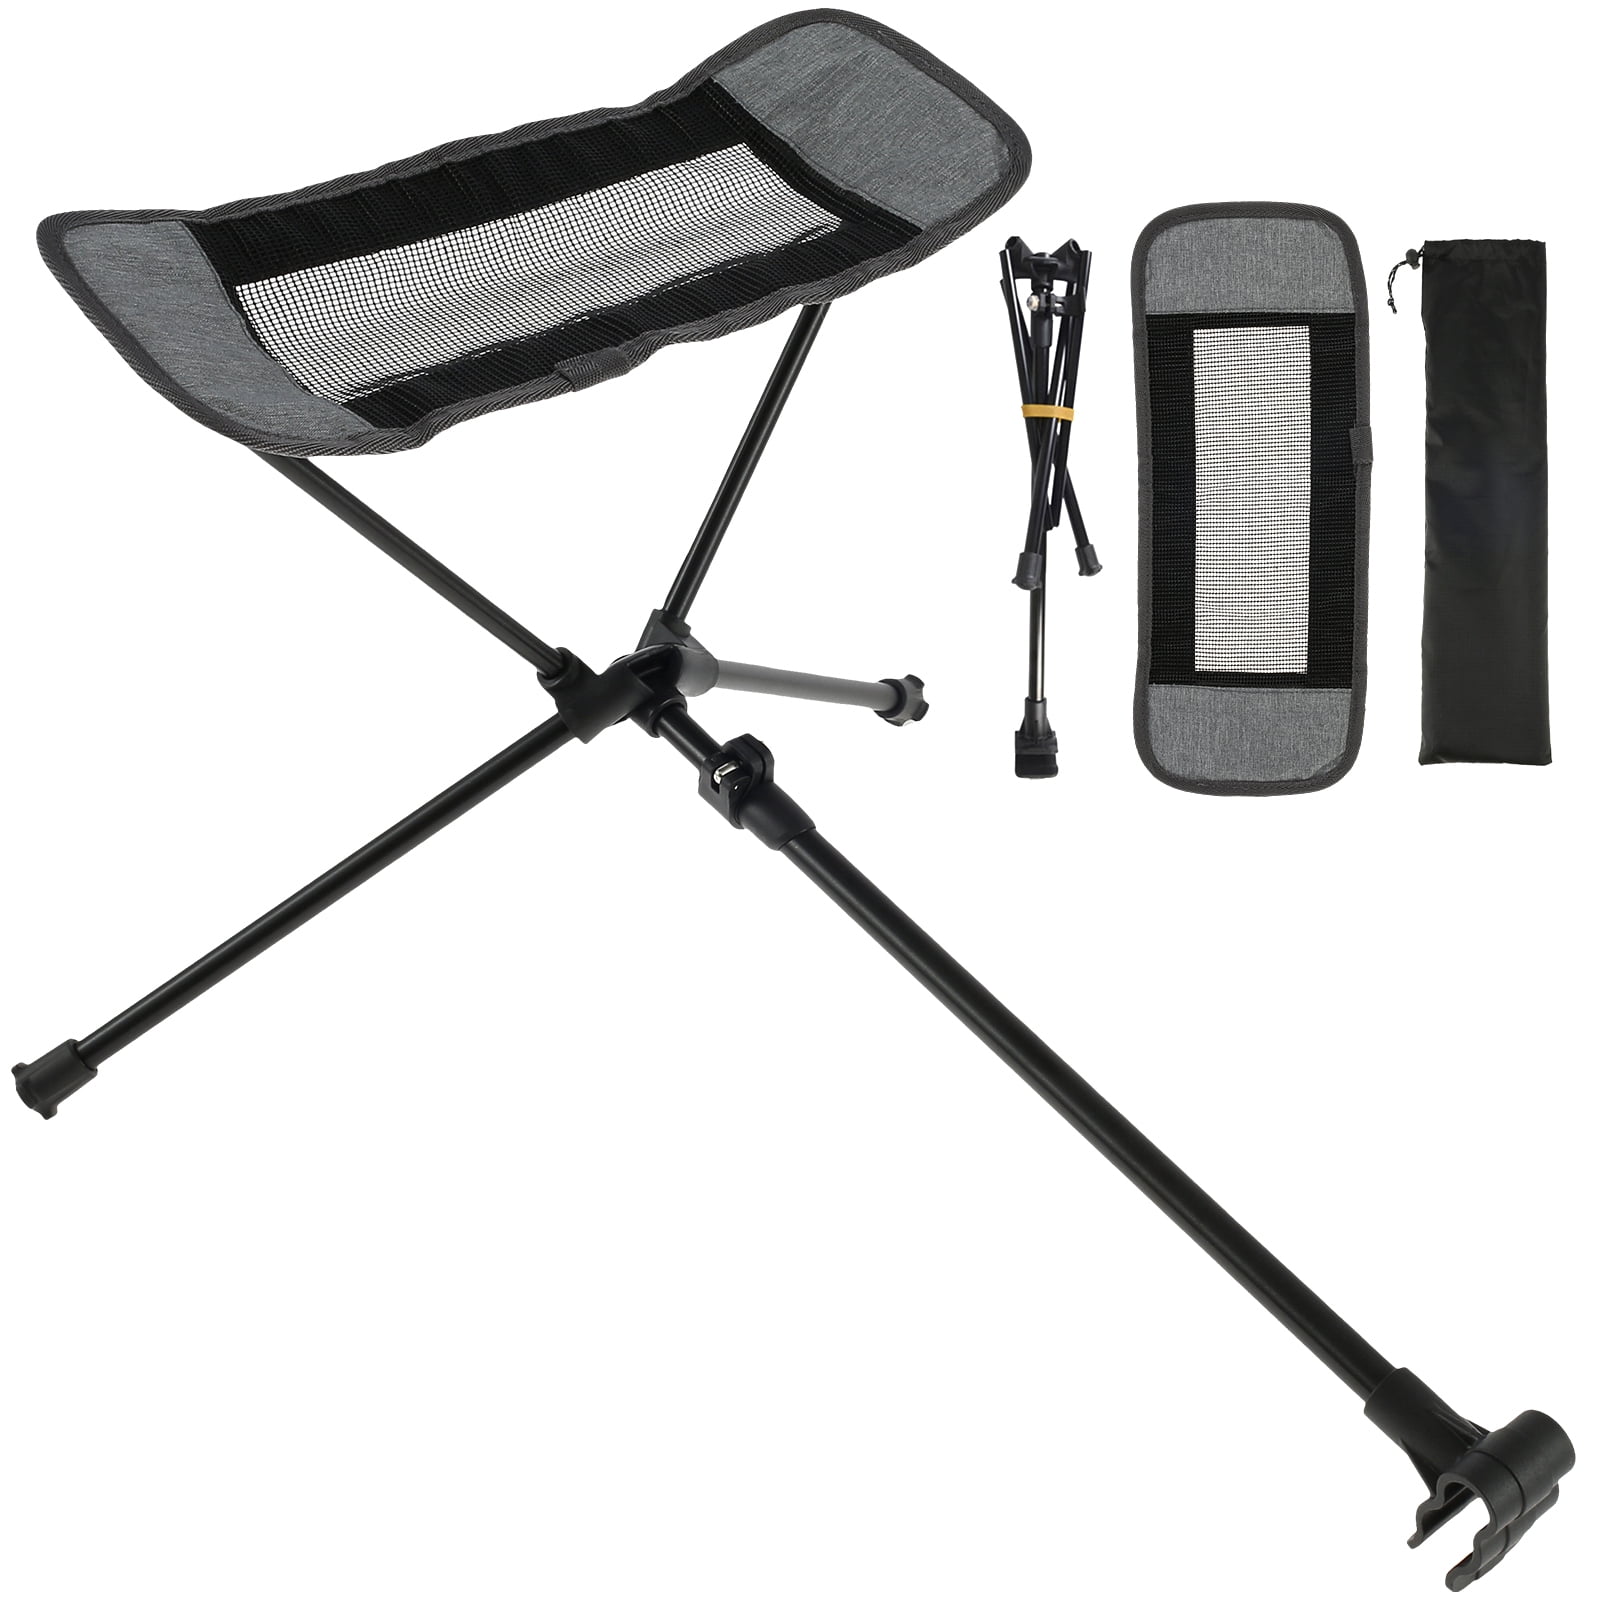 Portable Folding Chair Ottoman Outdoor Recliner Lazy Footrest Leg Rest  Camping Chair Footstool for Hiking Fishing Picnic 